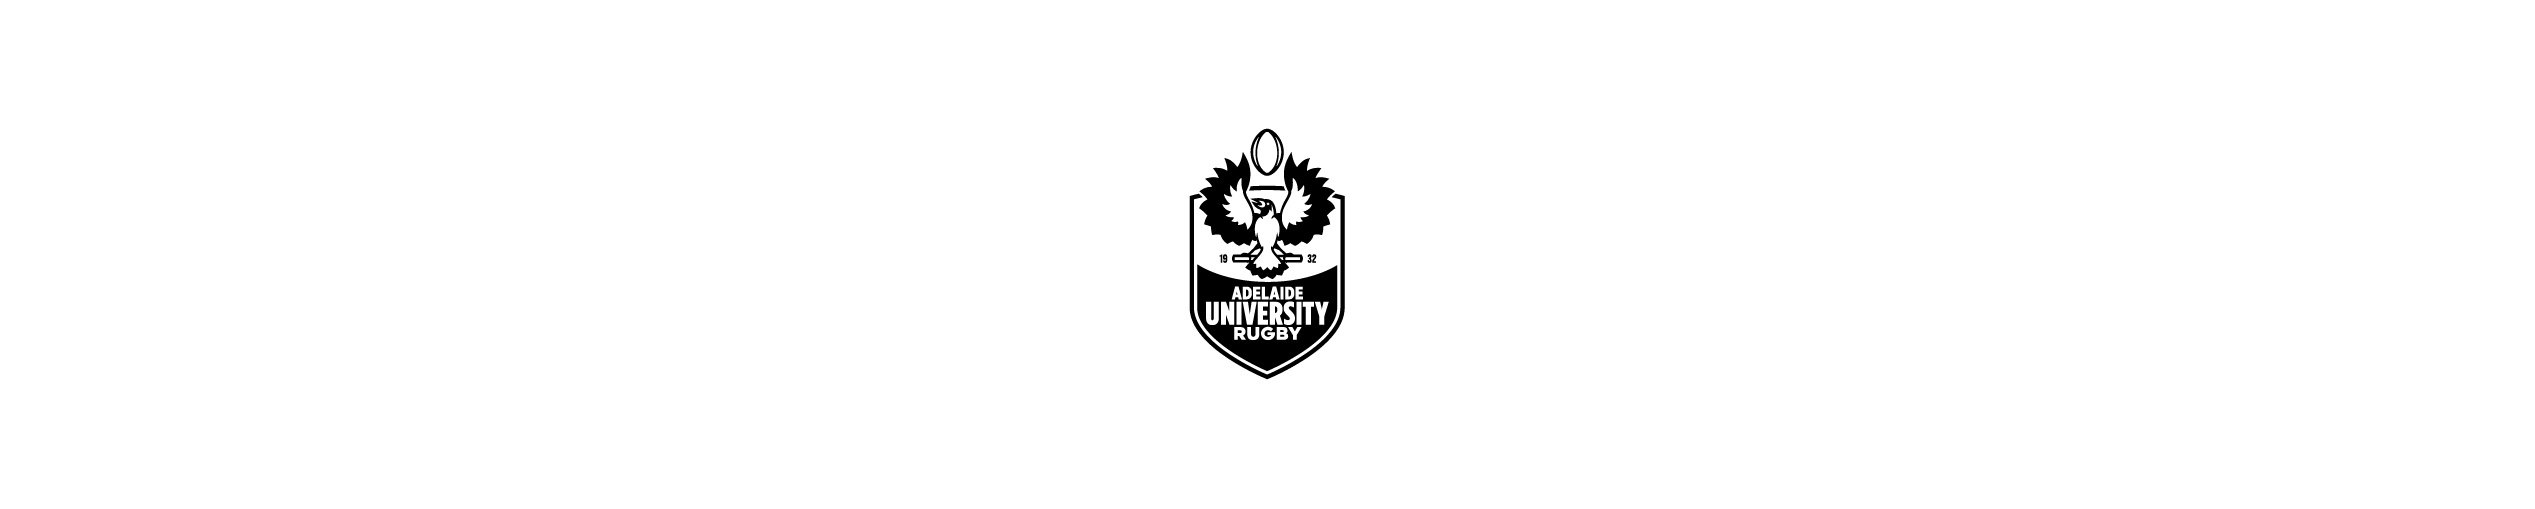 ADELAIDE UNIVERSITY RUGBY CLUB